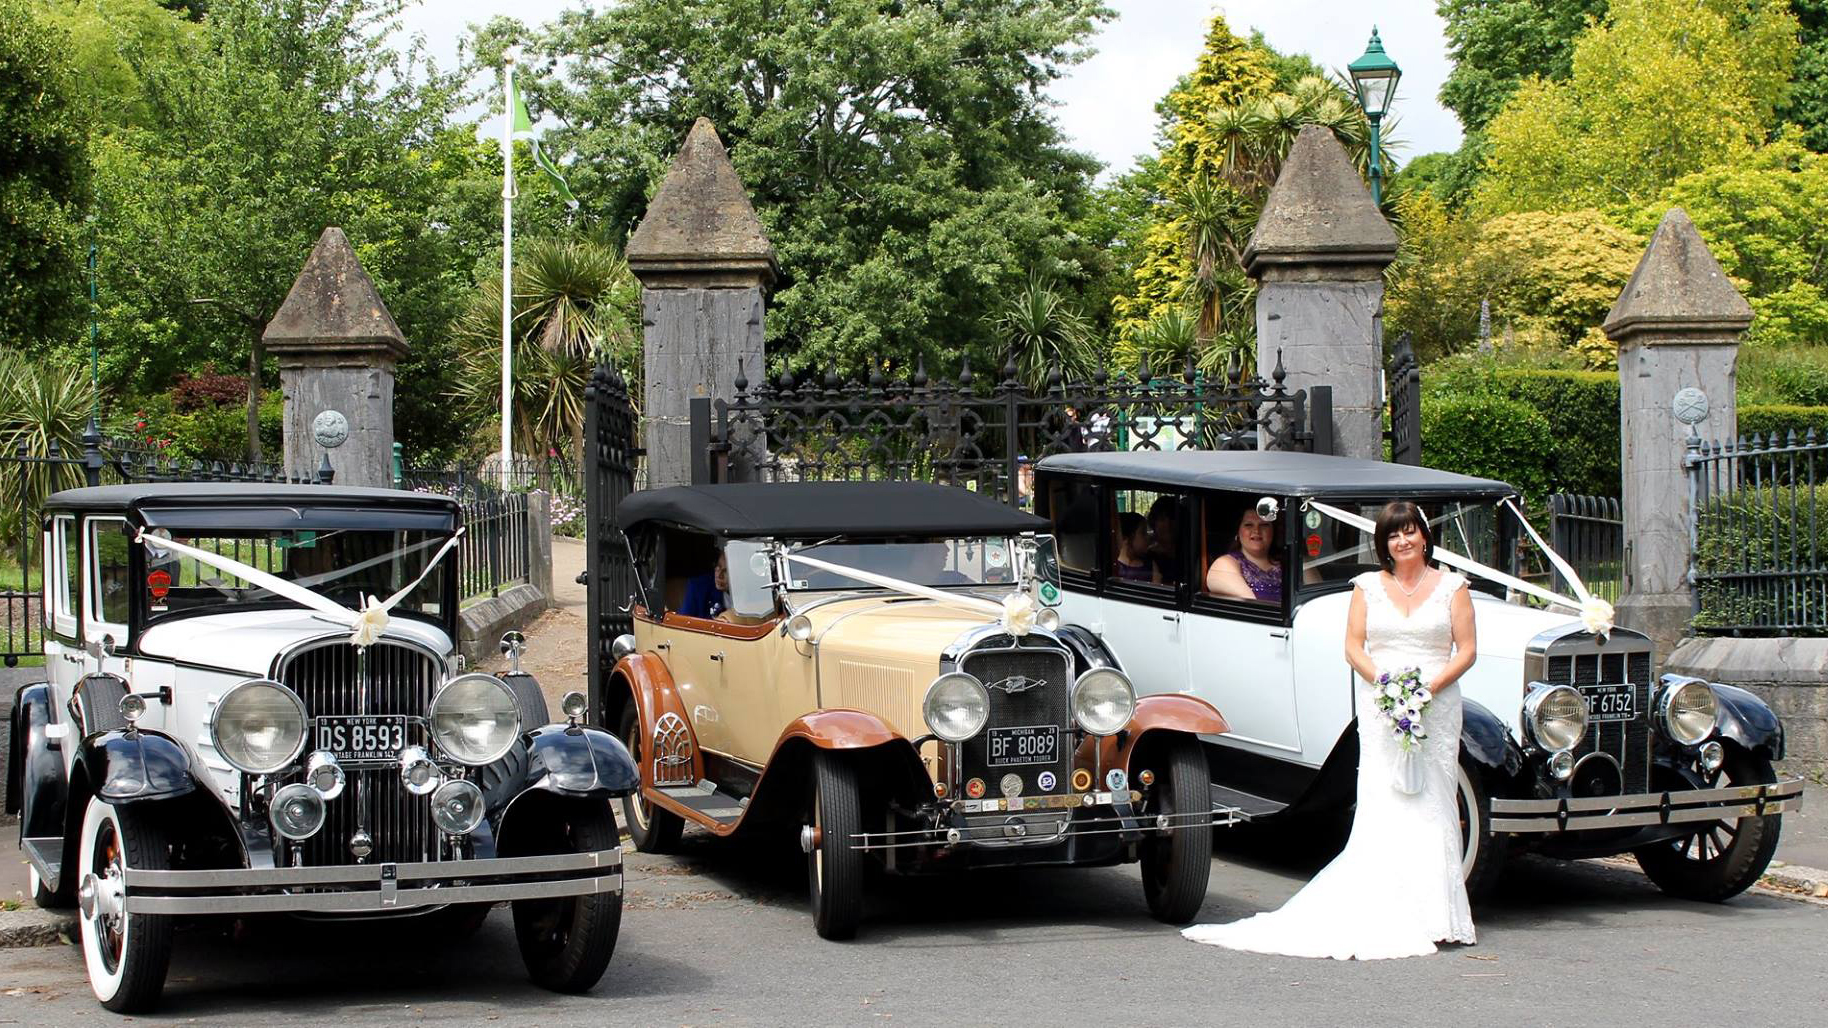 Three vintage wedding cars decorated with white ribbons at a local Tiverton wedding. All three vehicles are parked side-by-side with bride wearing a white dress holding a bridal bo